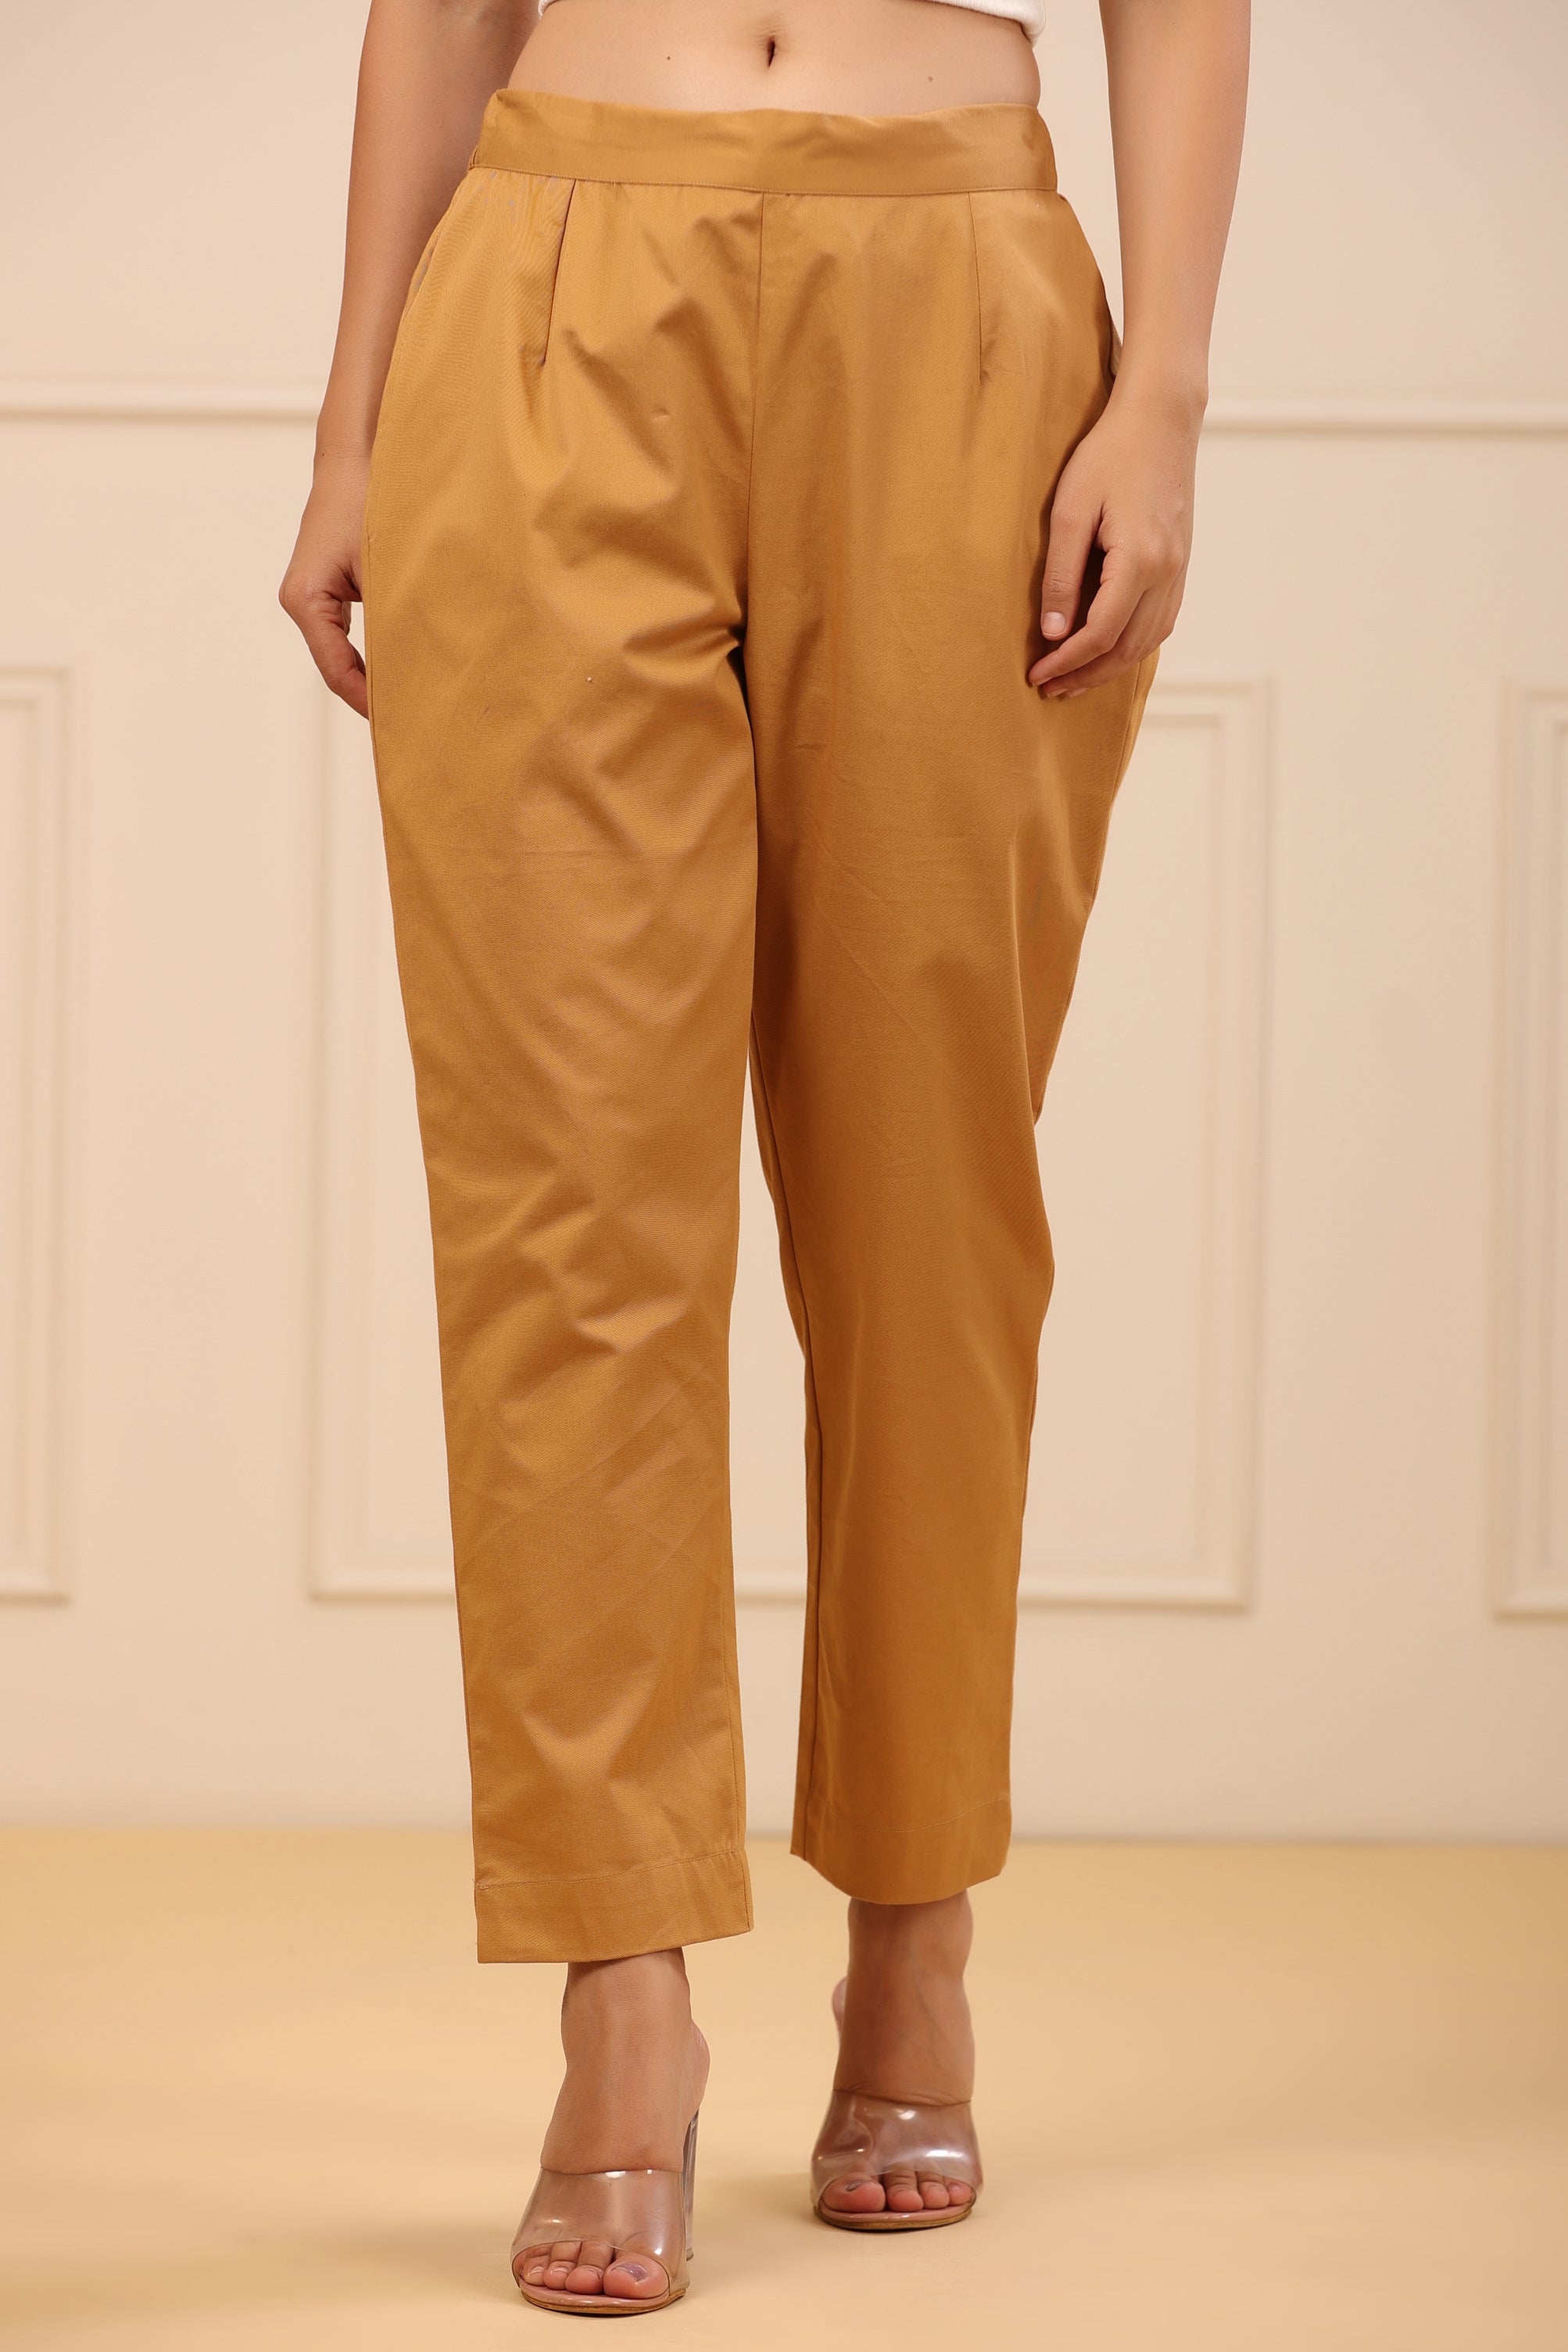 Juniper Gold Solid Slim Fit Cotton Pants With Partially Elasticated Waistband.